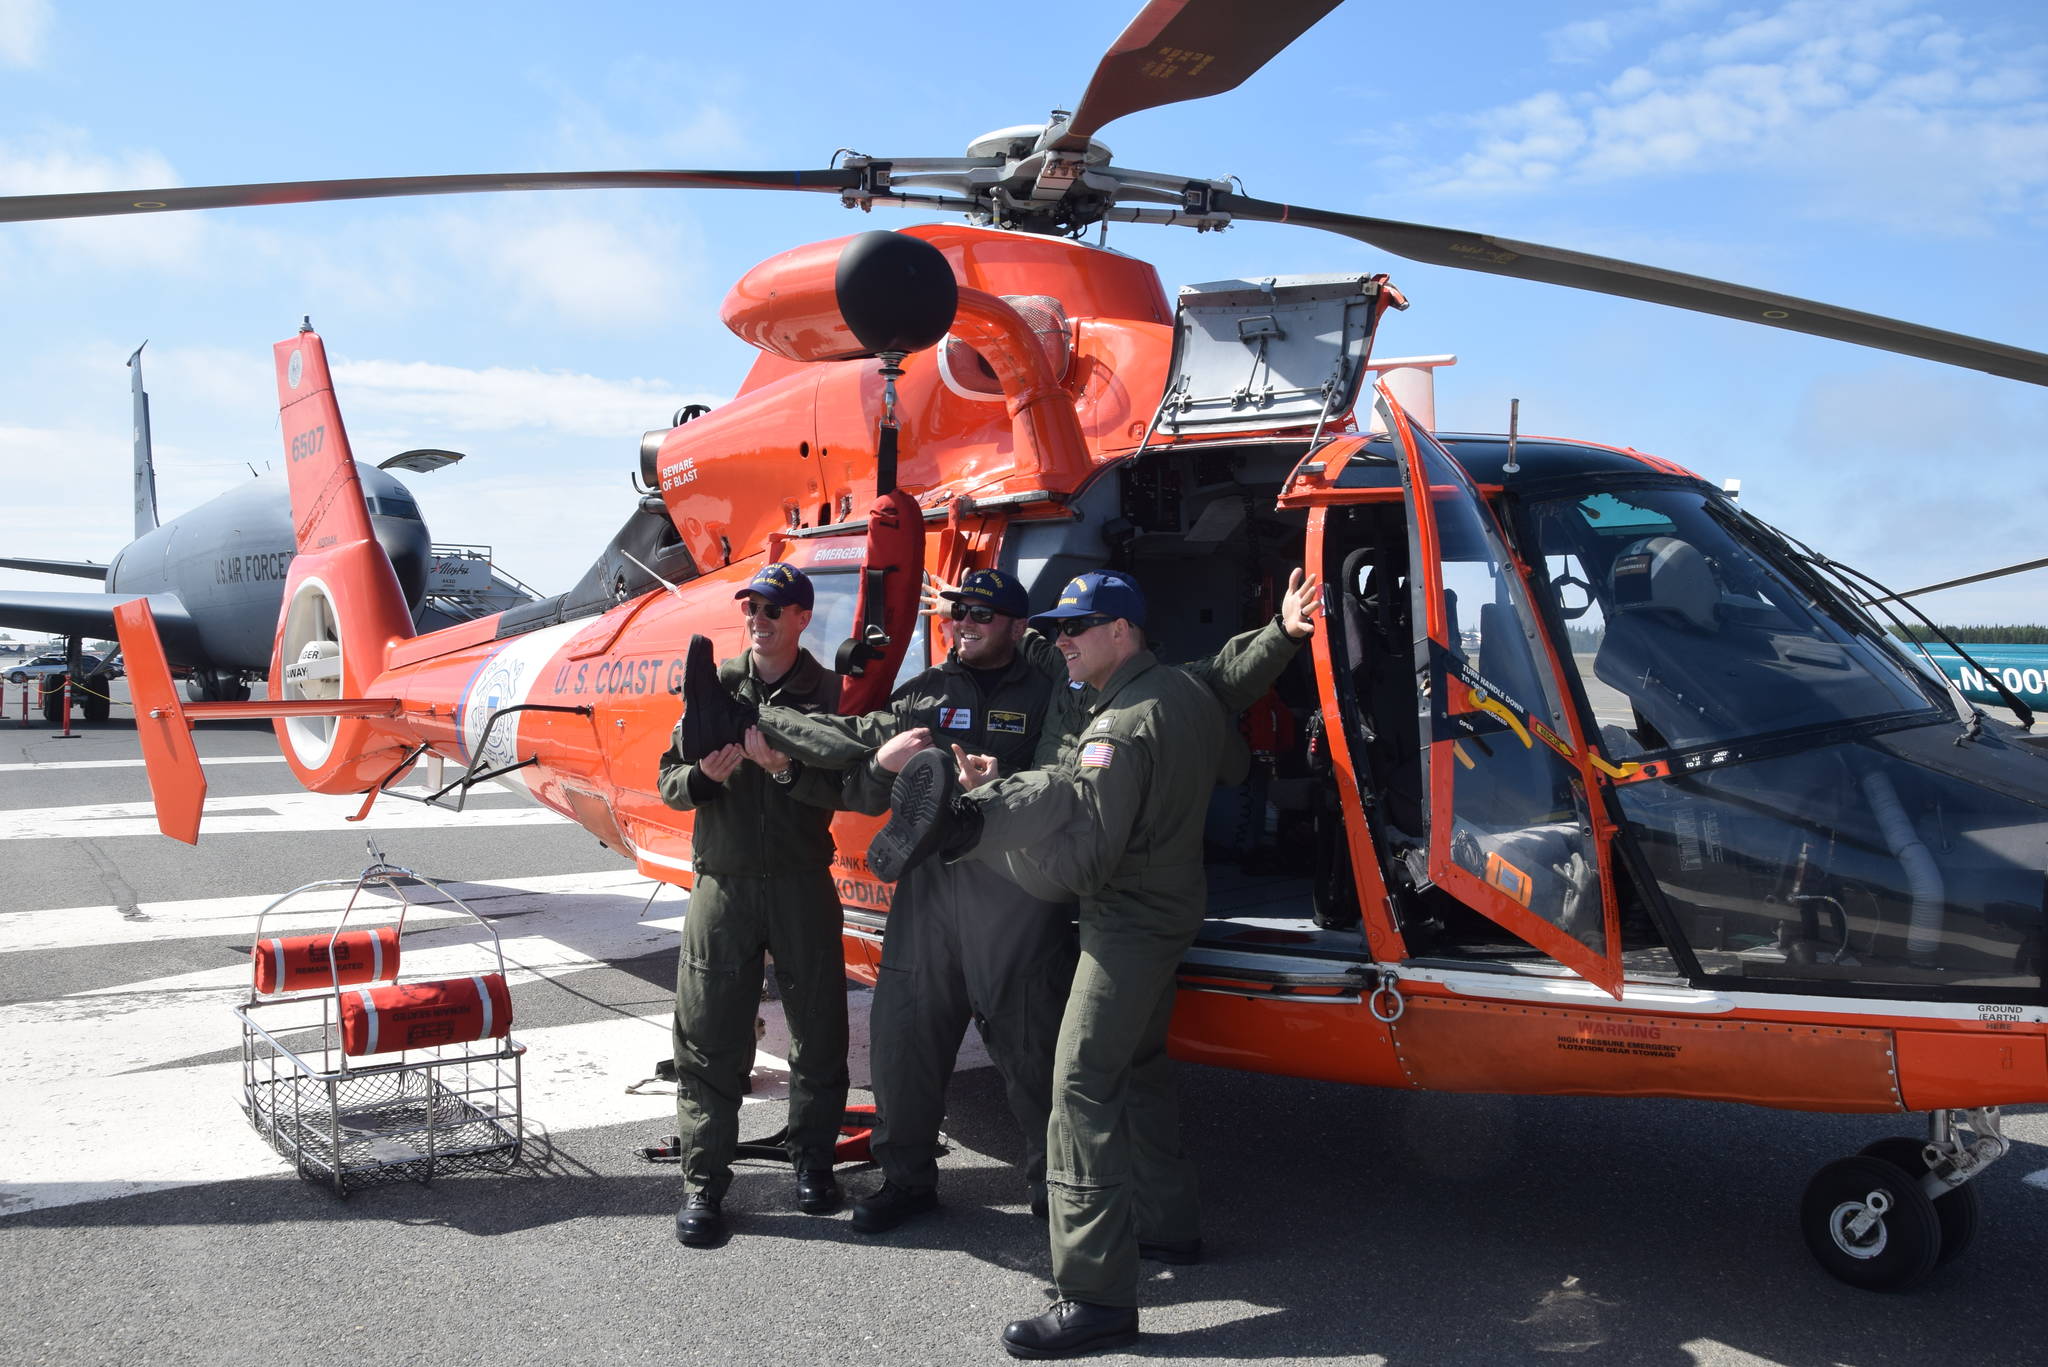 From right, Wes Jones, Jake Pritchett, Austin Robinson and Jay Kircher pose for a photo in front of a Eurocopter MH-65 Dolphin at the 19th annual Kenai Peninsula Air Fair in Kenai, Alaska on June 8, 2019. The four are part of a U.S. Coast Guard Search and Rescue Team based out of Kodiak, Alaska. (Photo by Brian Mazurek/Peninsula Clarion)